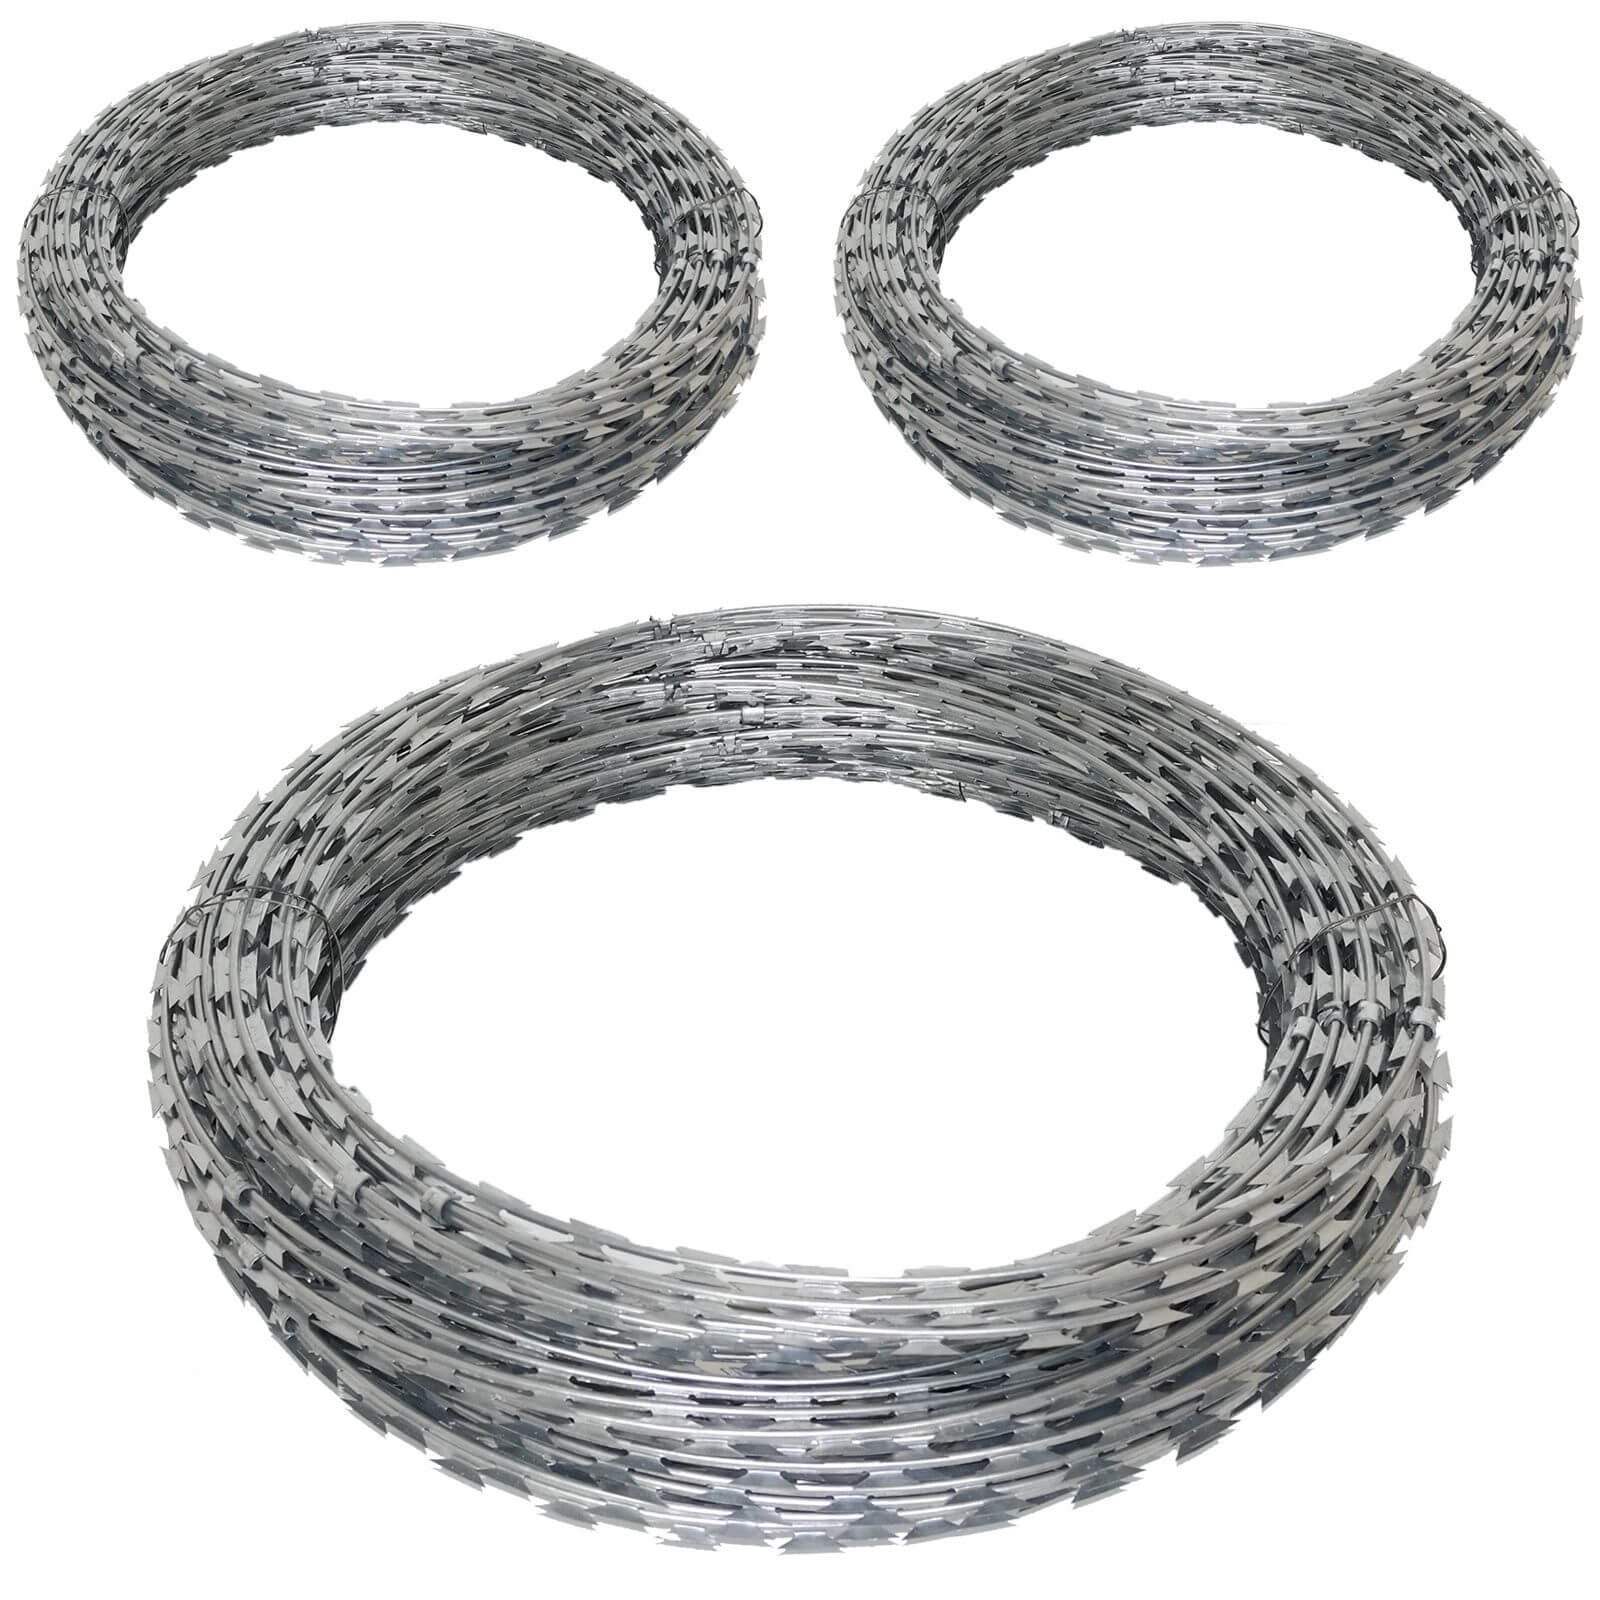 Why choose razor wire for your high-security needs